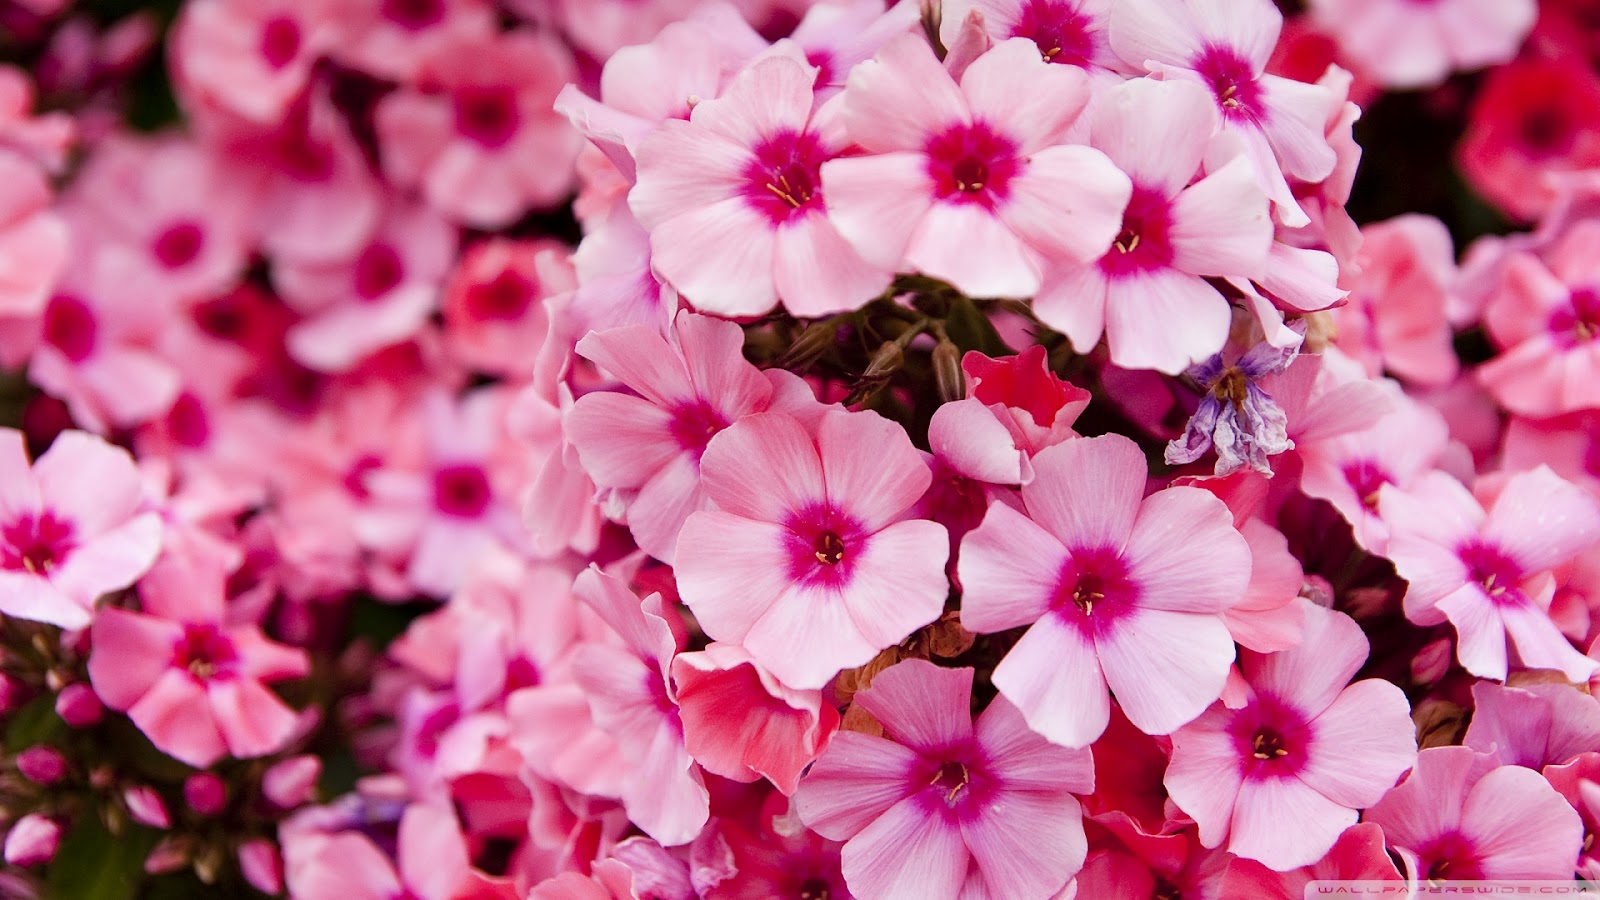 How Well-Rounded Is Your Knowledge? Take This General Knowledge Quiz to Find Out! flowers2